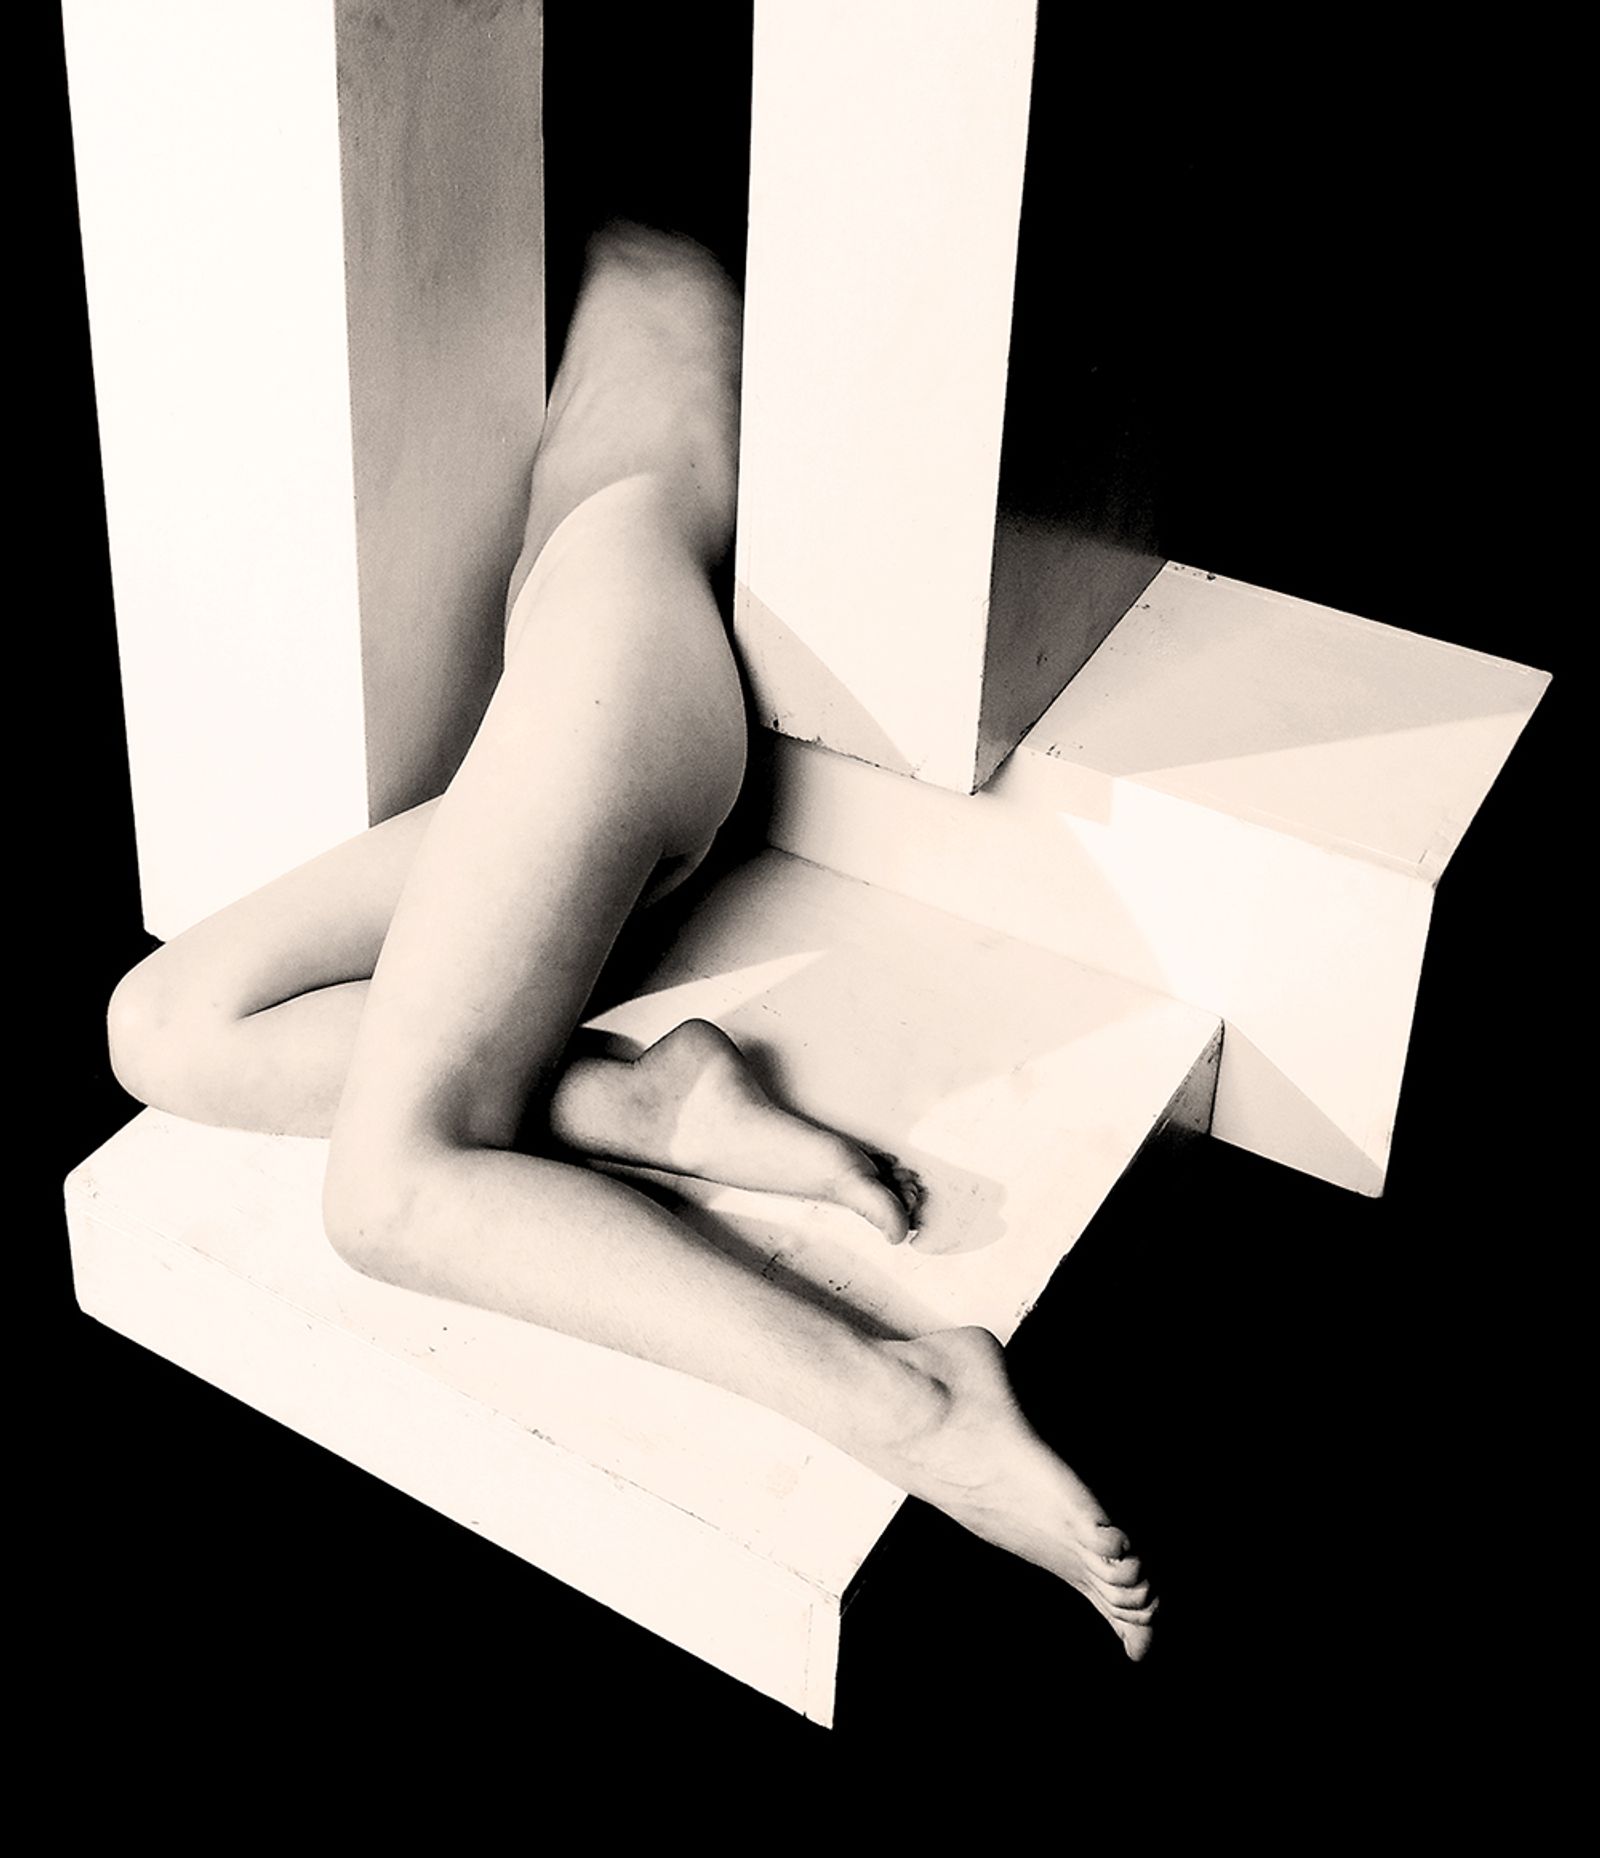 © Frederic Crist - Image from the Pedestal Series photography project